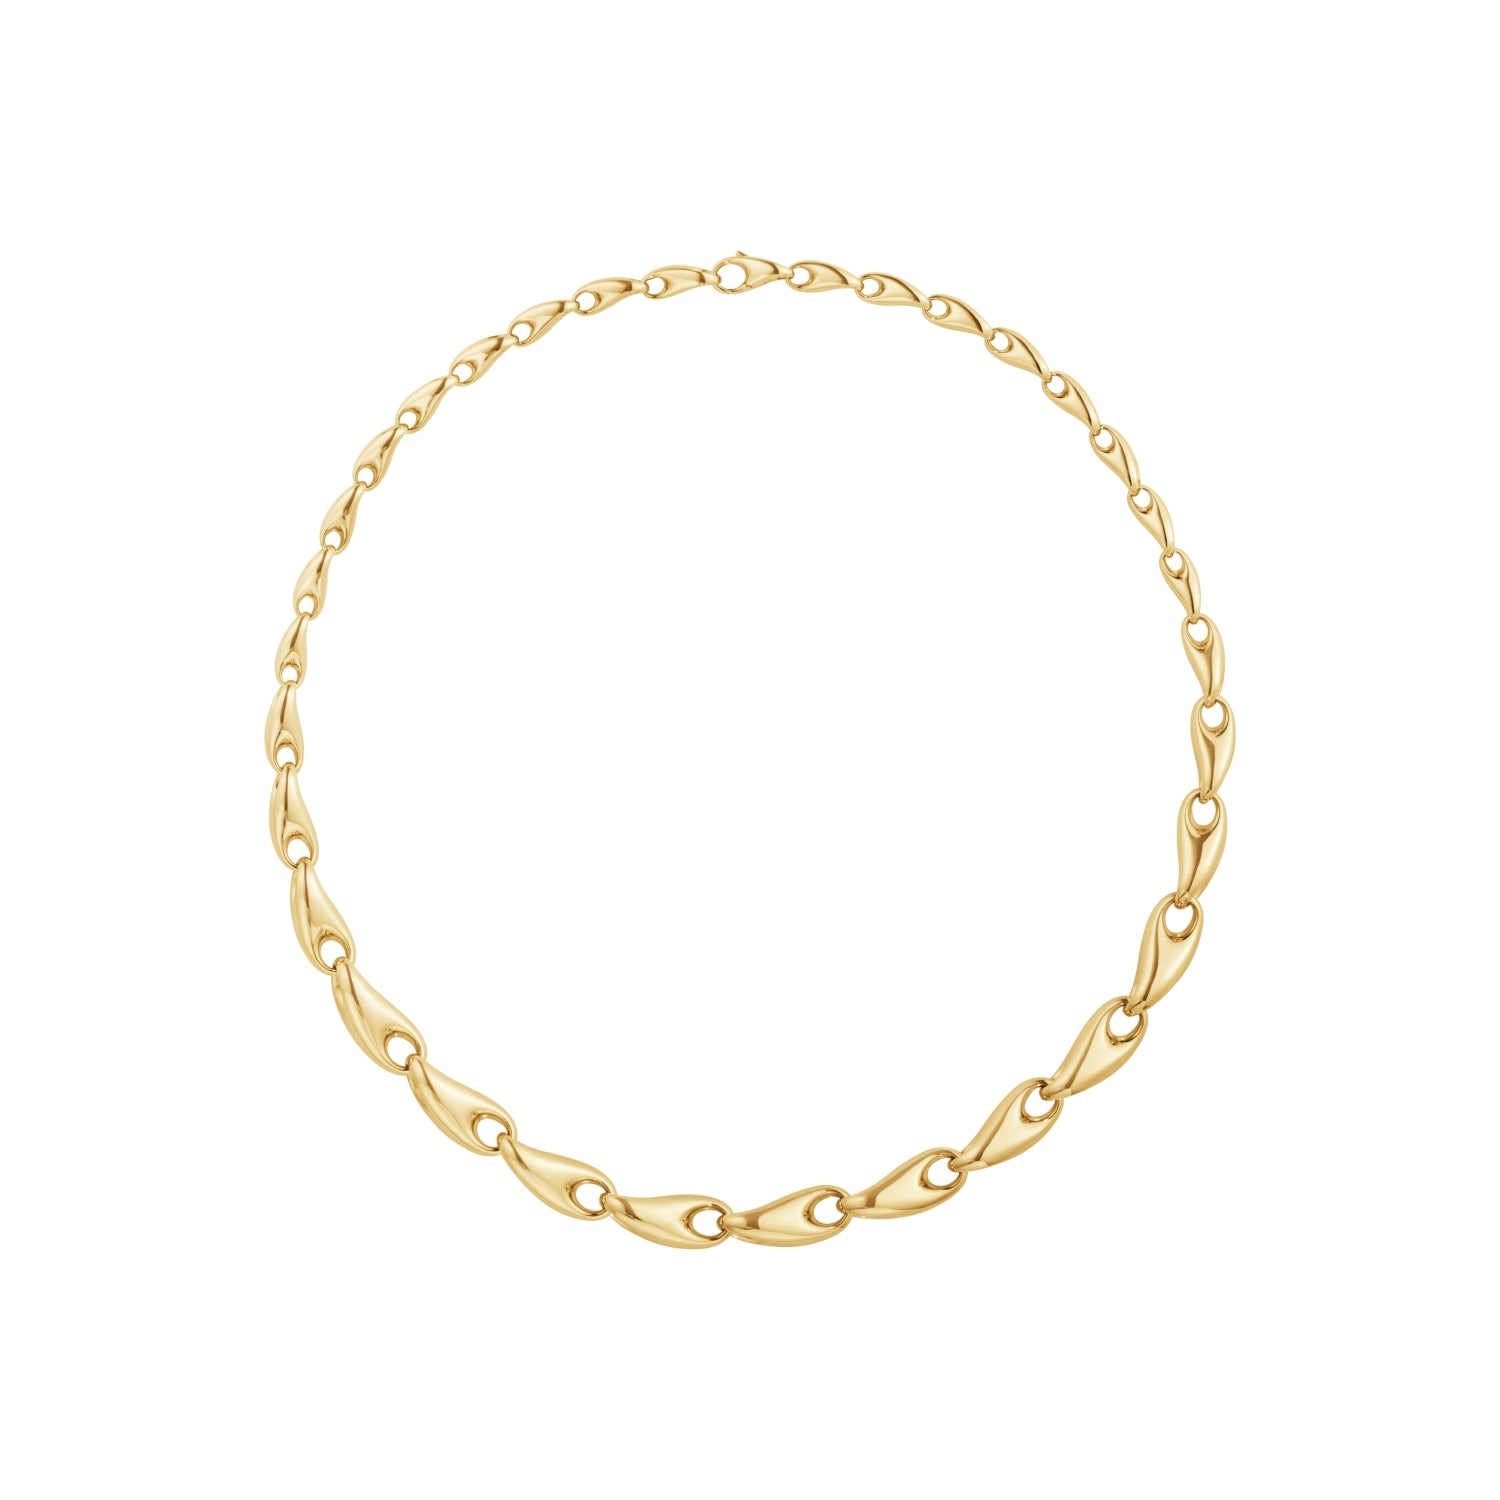 Georg Jensen Reflect 18ct Yellow Gold Graduated Link Necklace